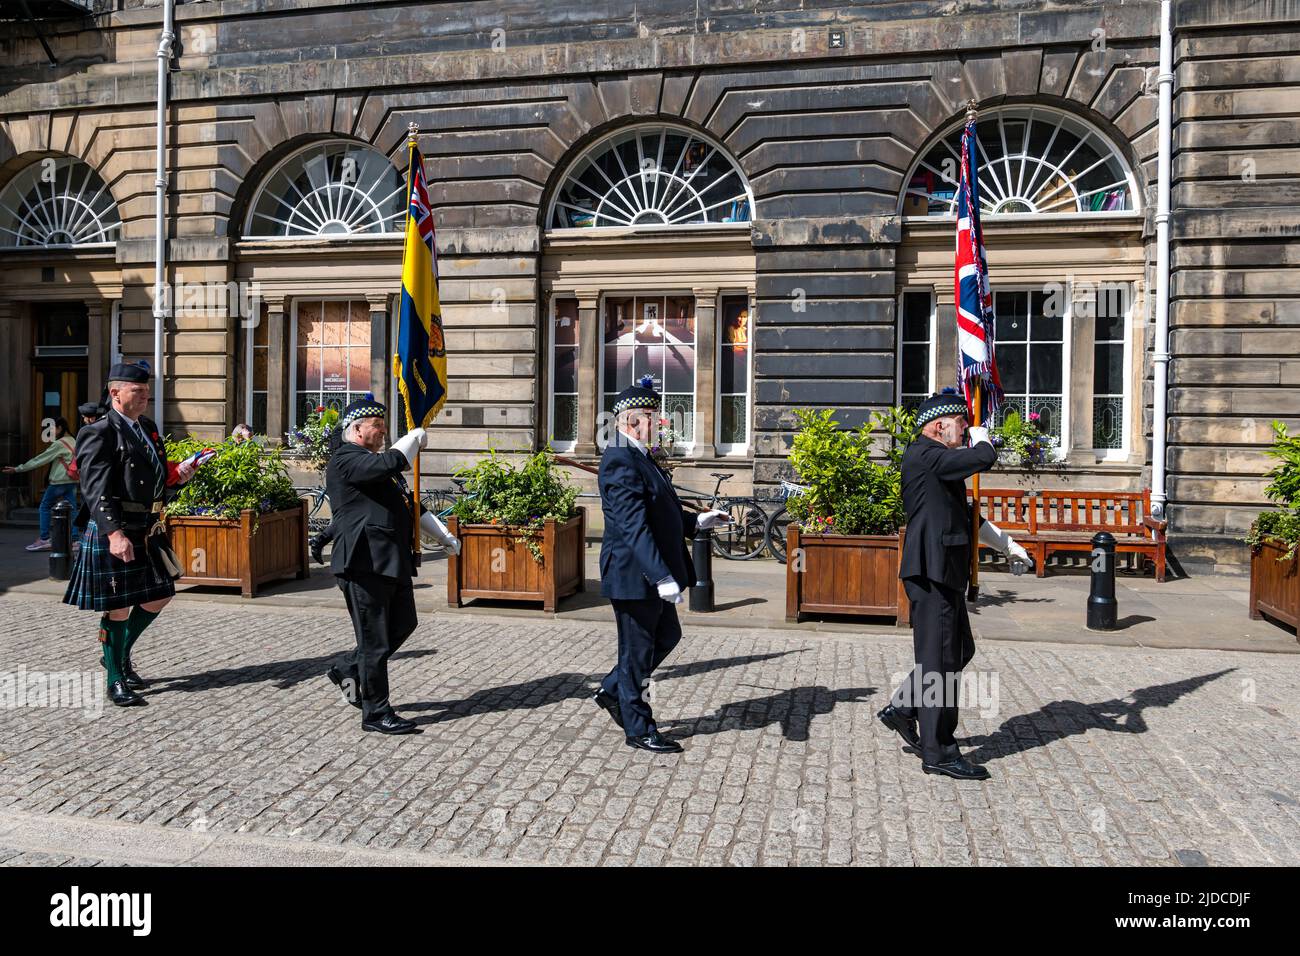 City Chambers, Edinburgh, Scotland, United Kingdom, 20 June 2022. Armed Forces flag raising ceremony: A procession with Armed Forces Day flag at City Chambers with a Parade Marshall, standard bearers & Eddie Maley carrying the flag plus guests Lt Cdr Will McLeman (Royal Navy) Garrison Commander Lt Col Lorne Campbell (British Army) & Squadron Leader Derek Read (Royal Air Force). The Flag Raising Ceremony is a national event to honour Armed Forces personnel Stock Photo